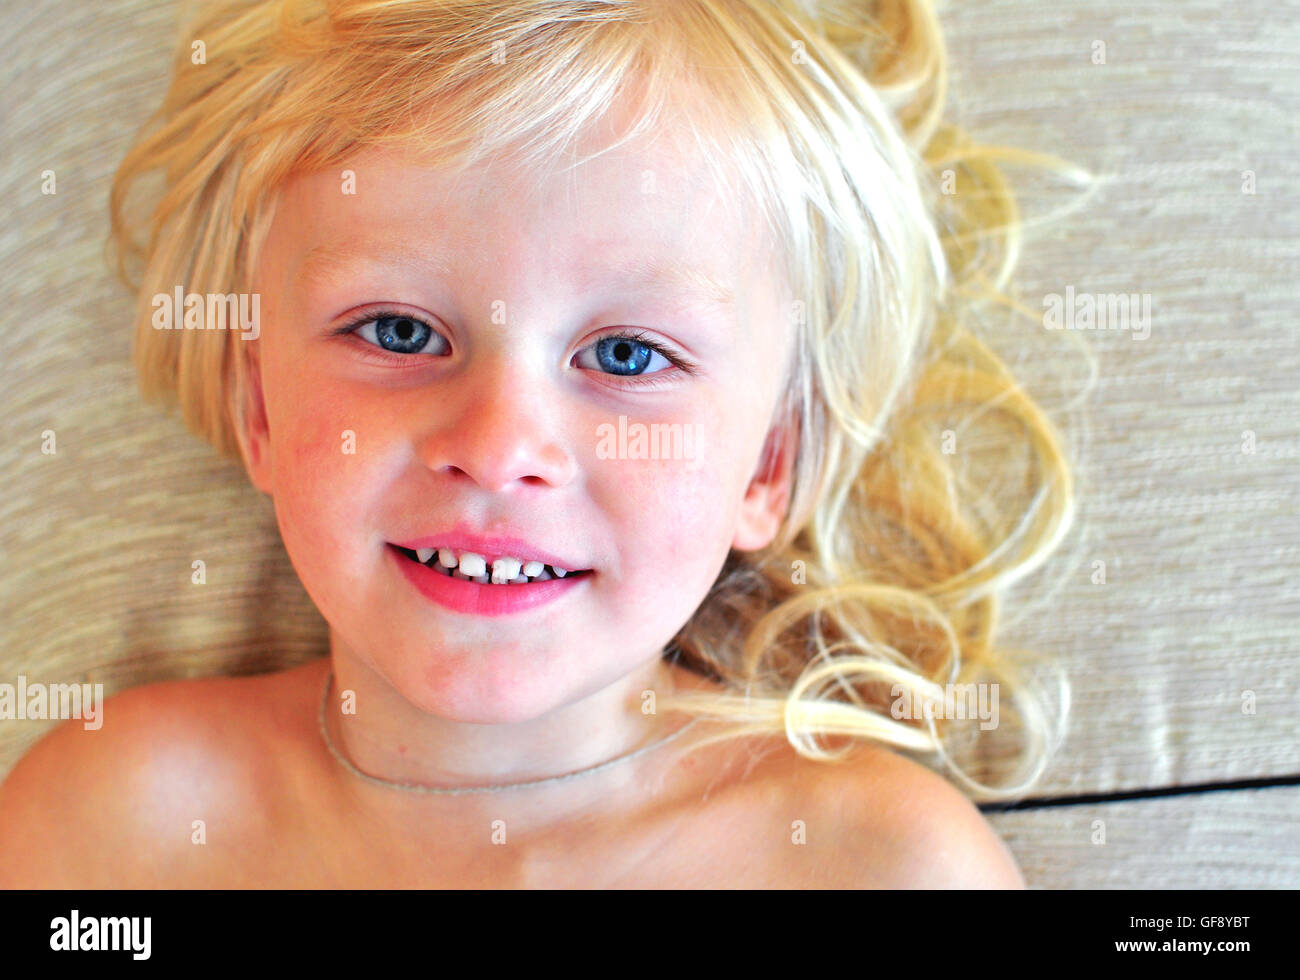 Cute little boy with blonde hair Stock Photo - Alamy